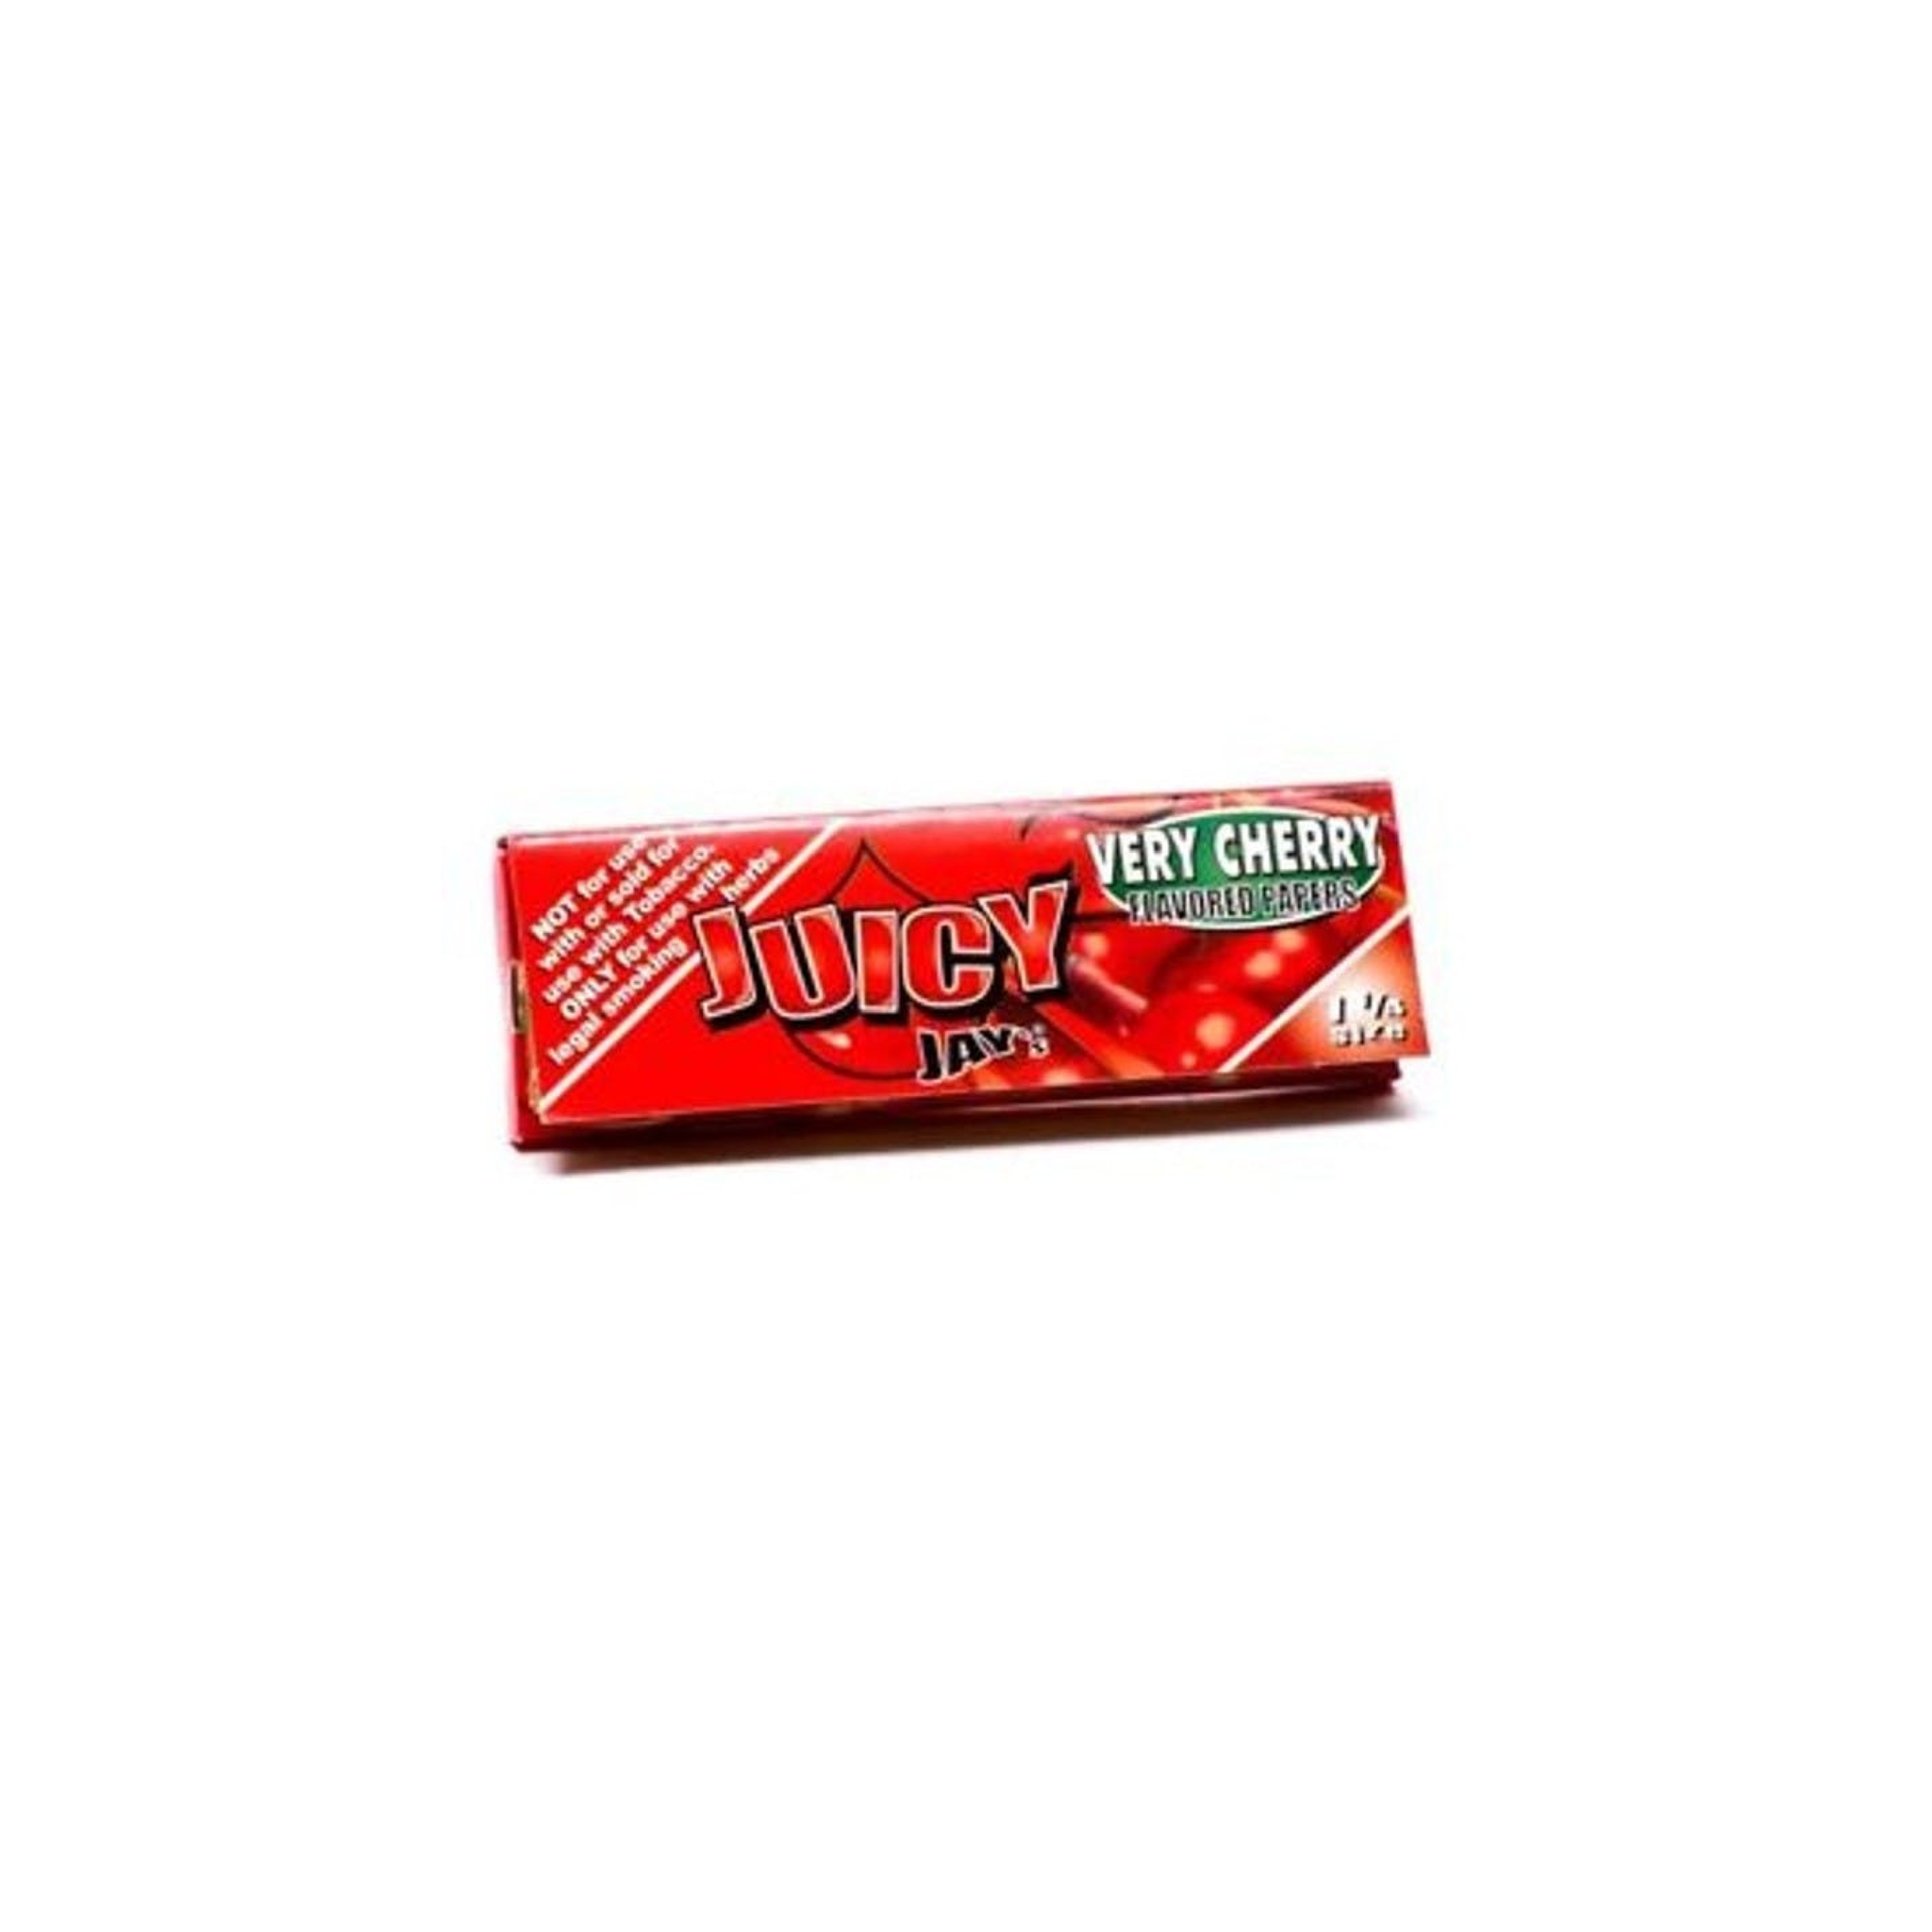 Very Cherry Rolling Papers